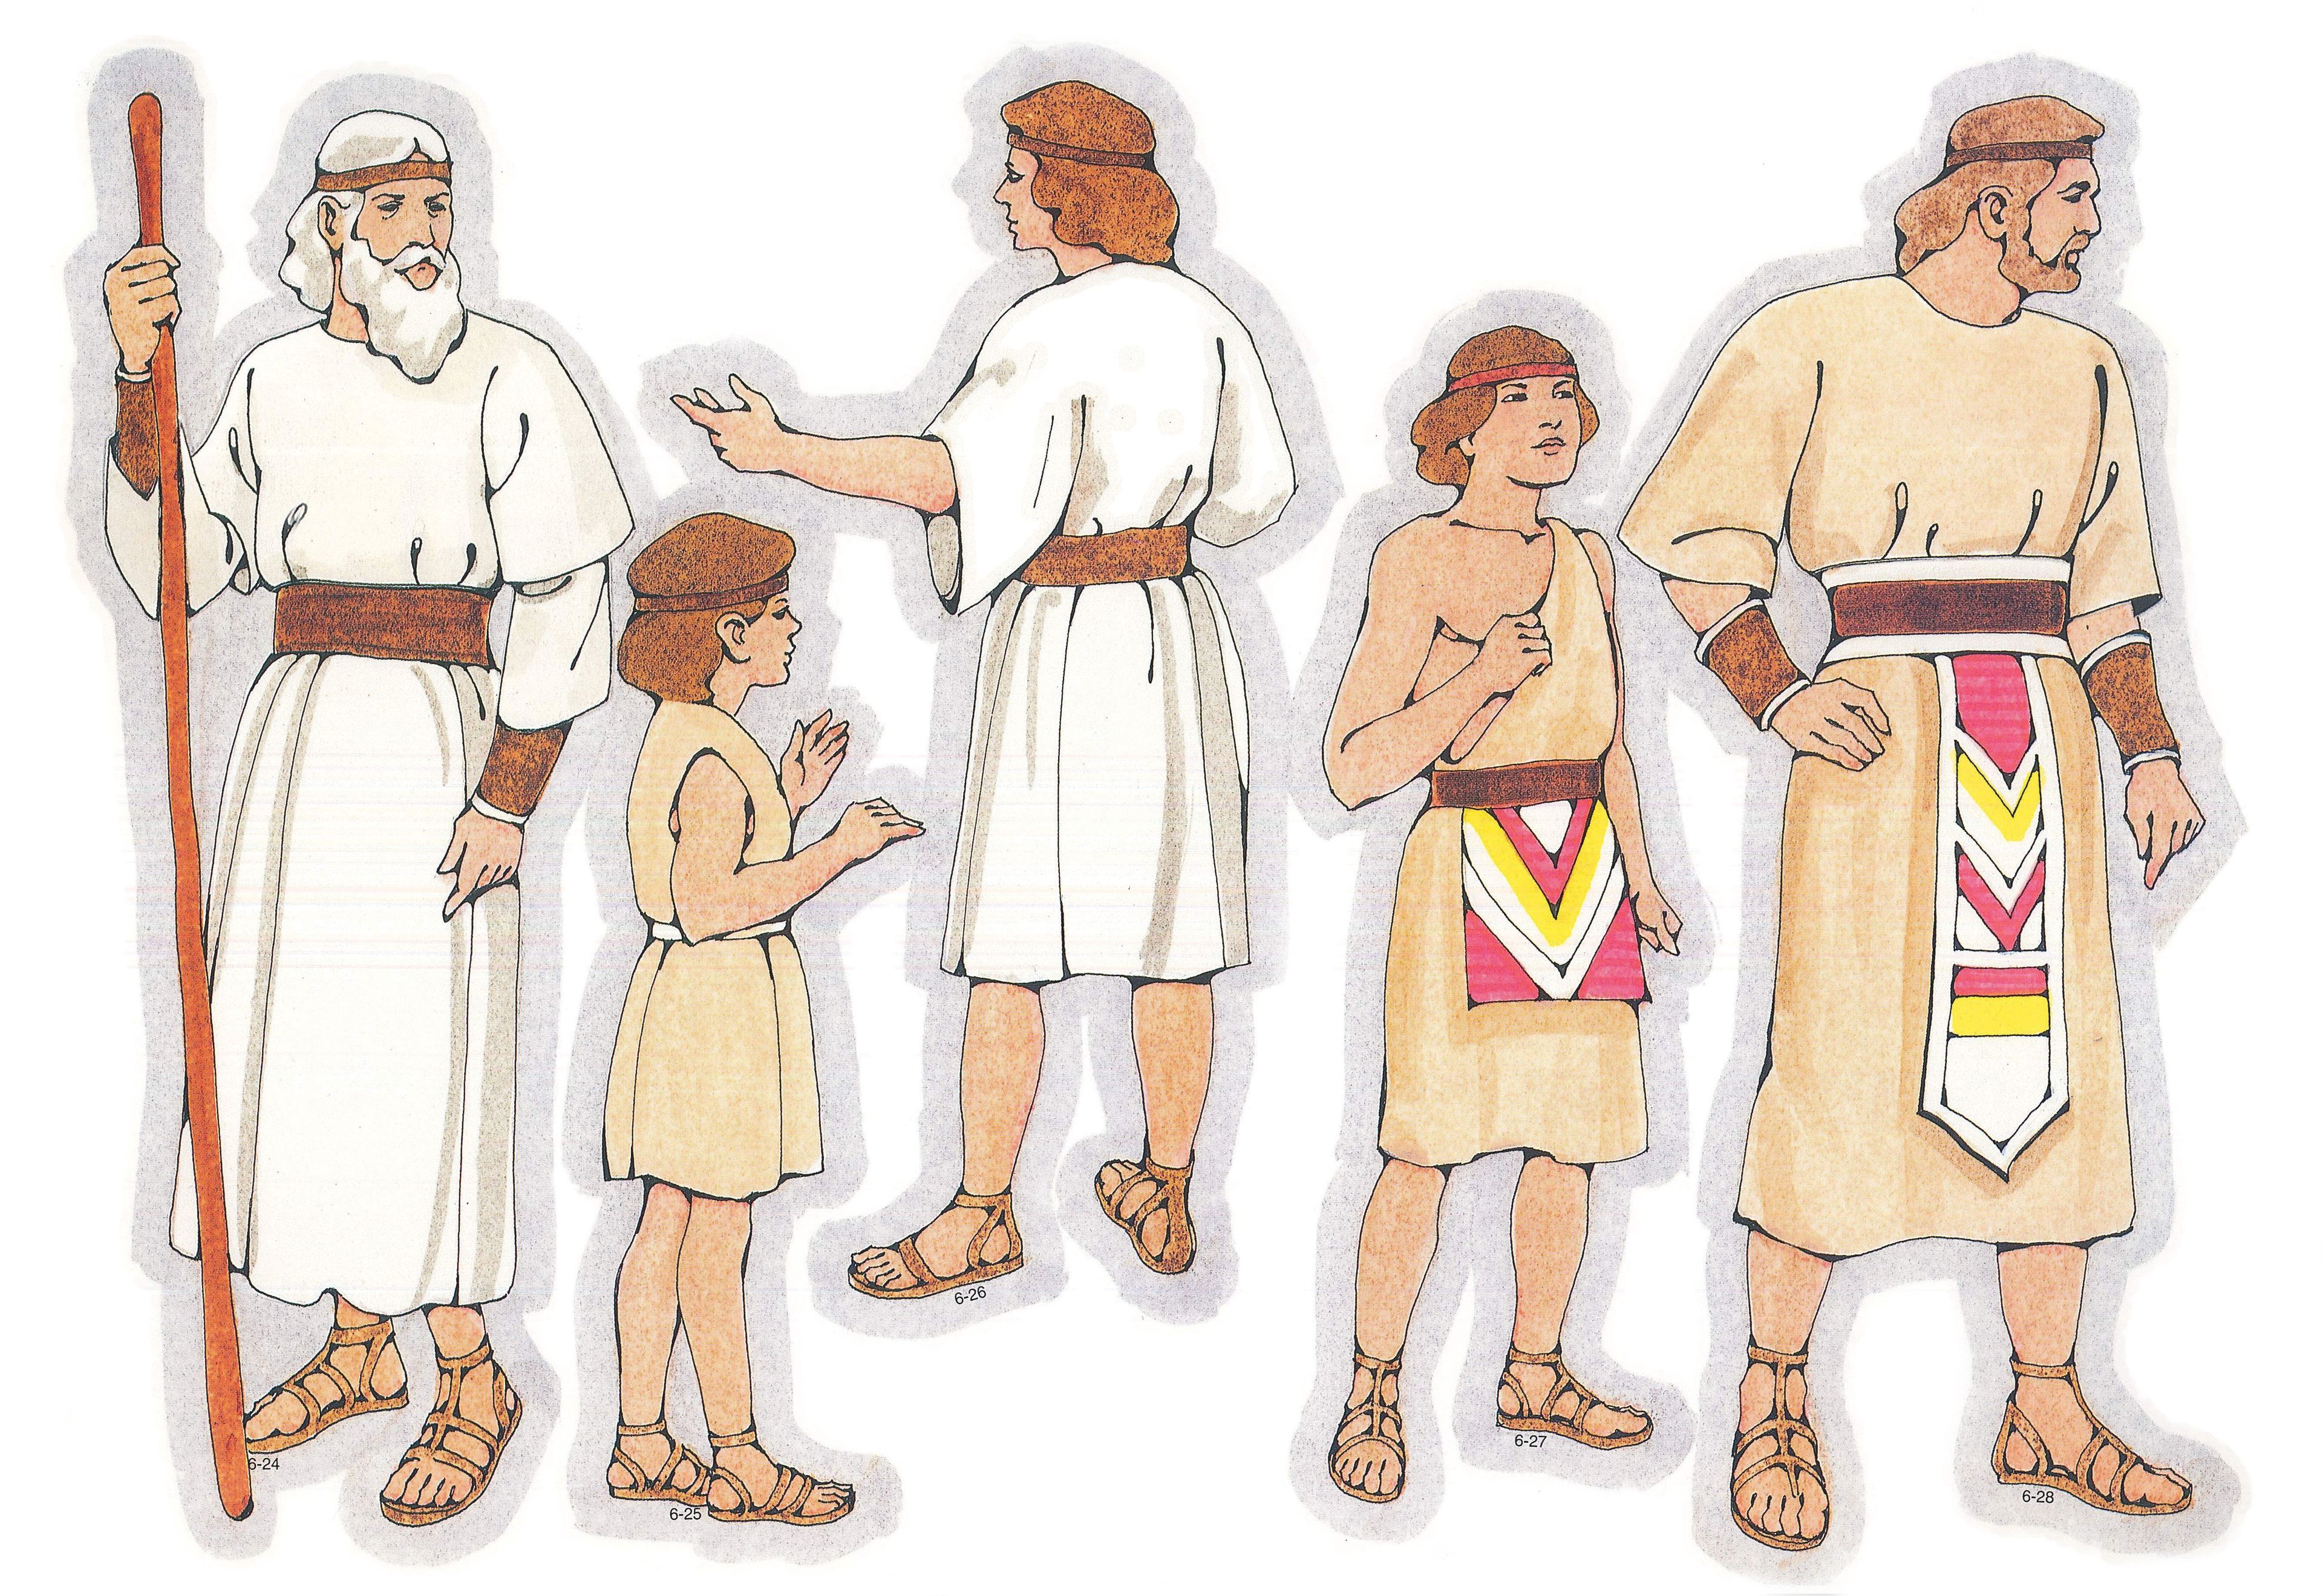 Primary Visual Aids: Cutouts 6-24, Nephite Man with Staff; 6-25, Nephite Child; 6-26, Nephite Young Man; 6-27, Nephite Boy; 6-28, Nephite Middle-Aged Man.